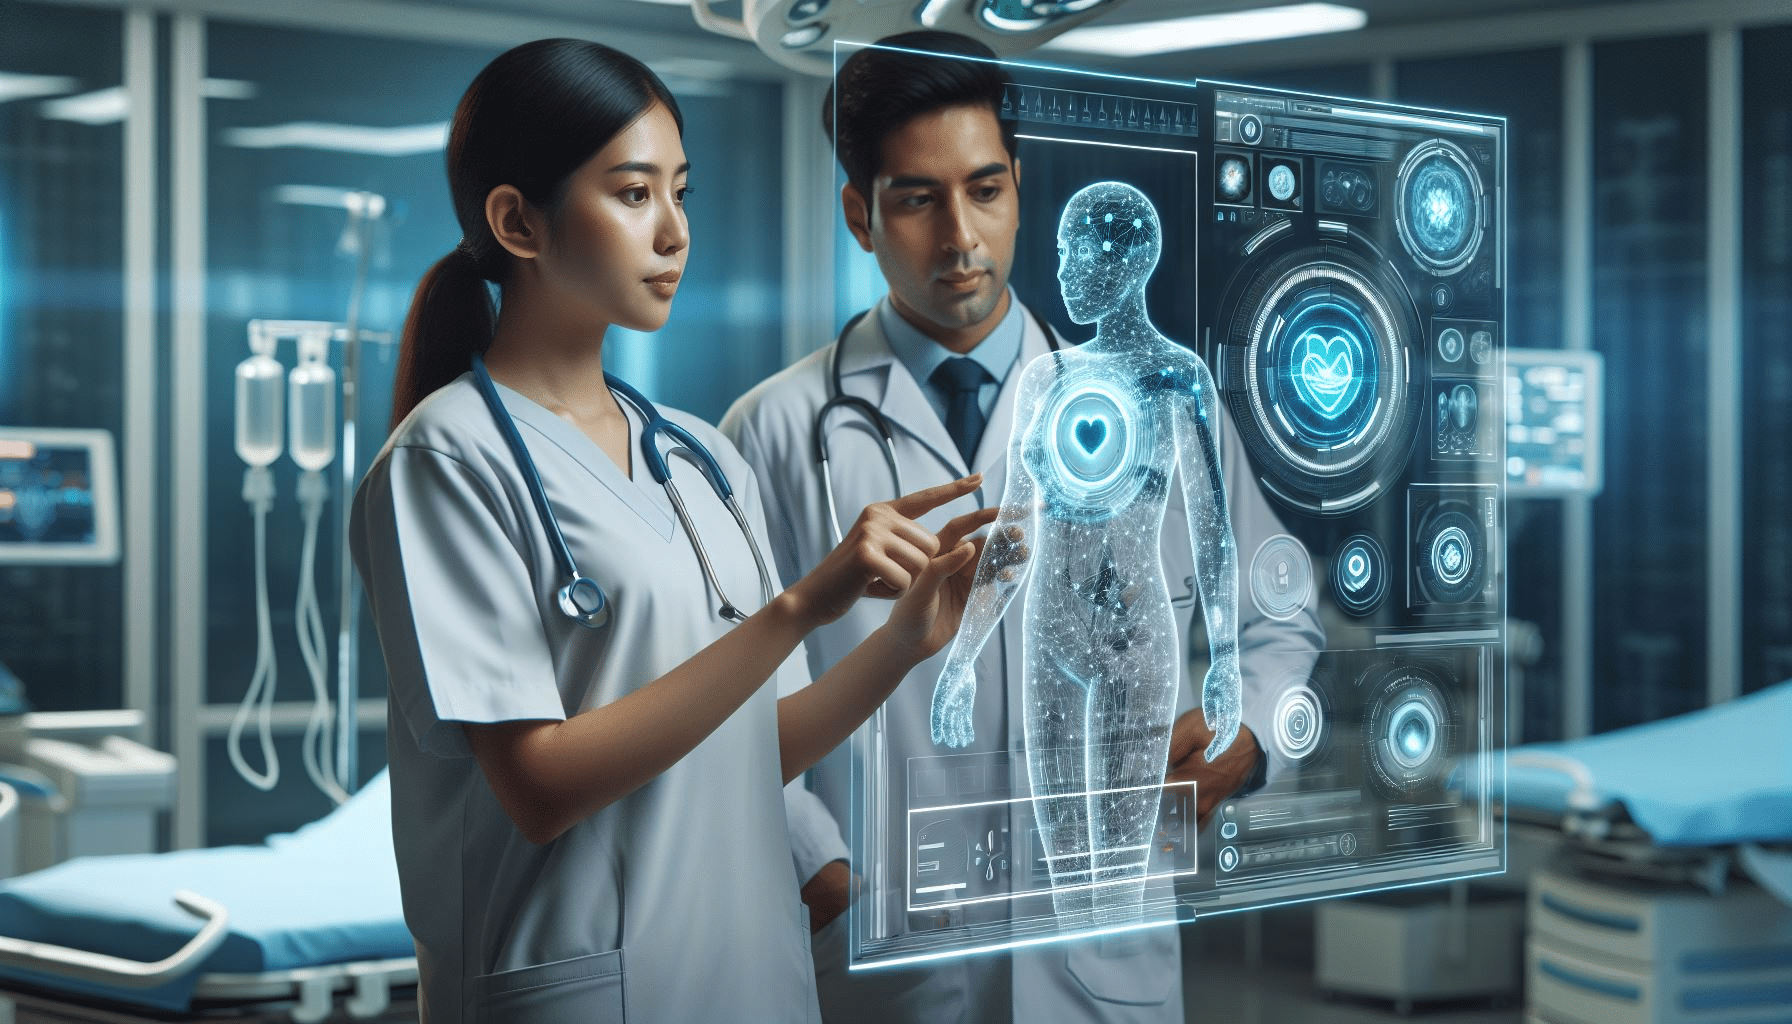 AI Workers in a healthcare setting, showing a doctor and nurse interacting with a holographic AI interface.